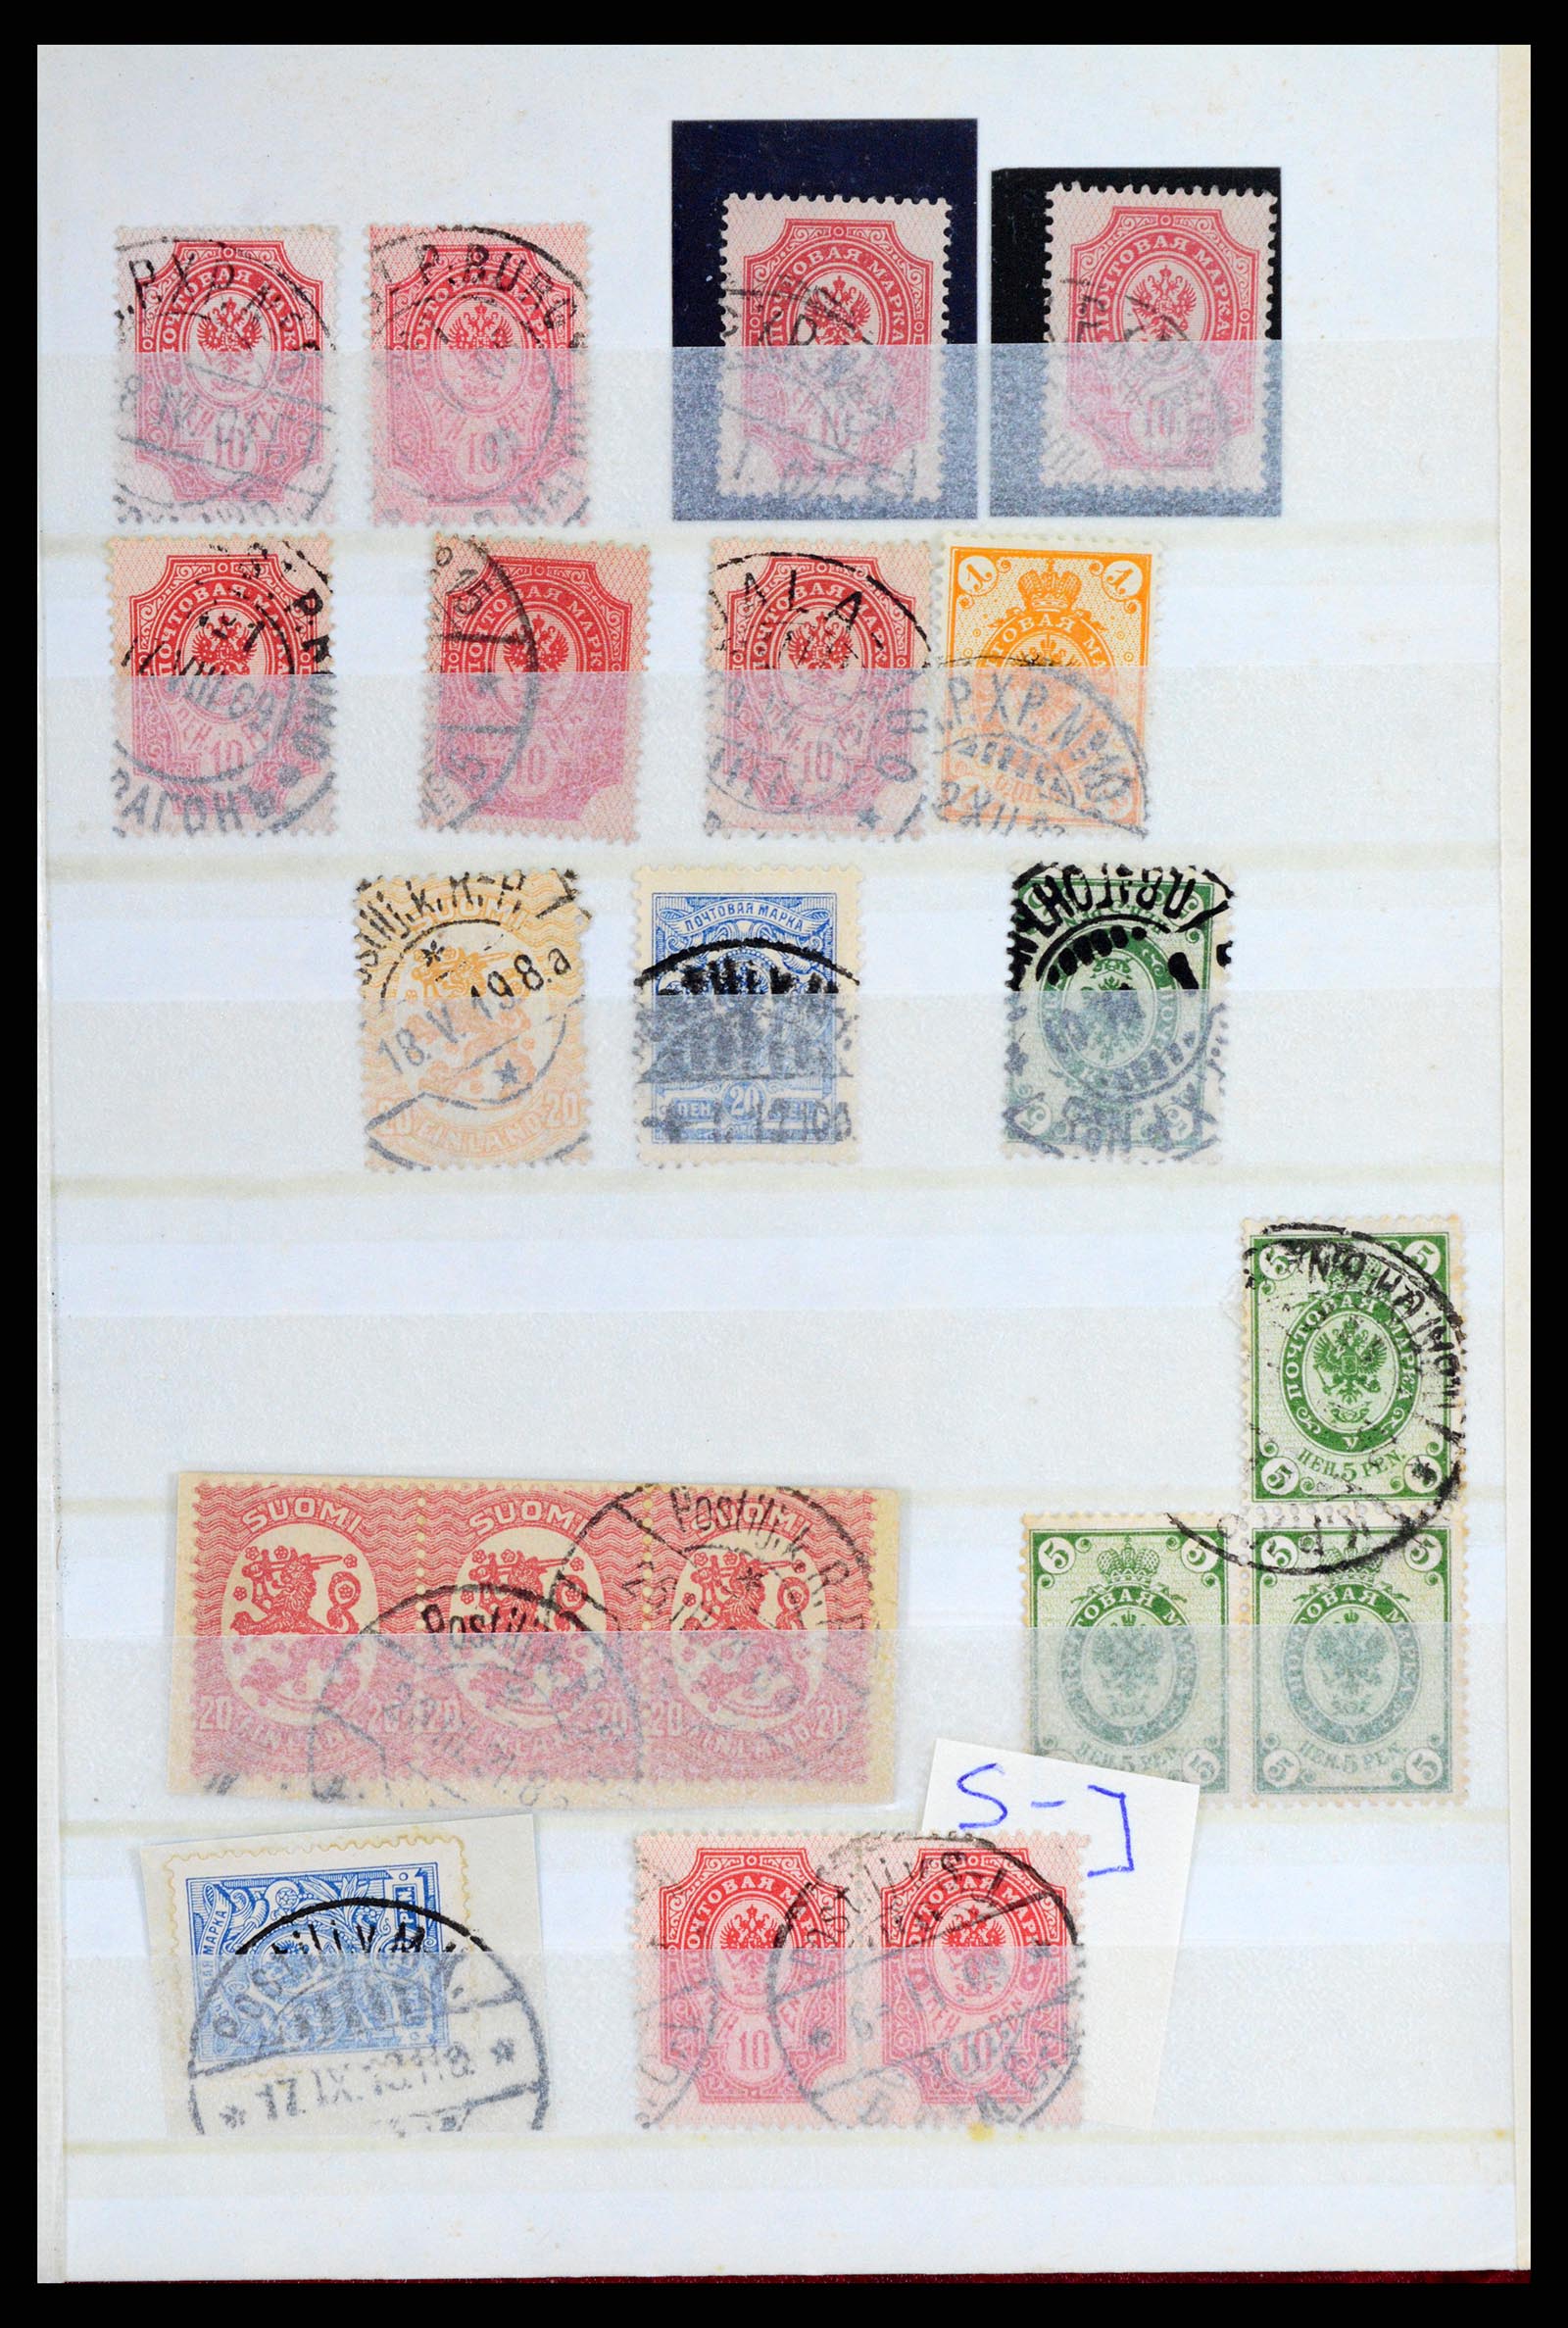 37766 180 - Stamp collection 37766 Finland railway cancellations 1870-1950.